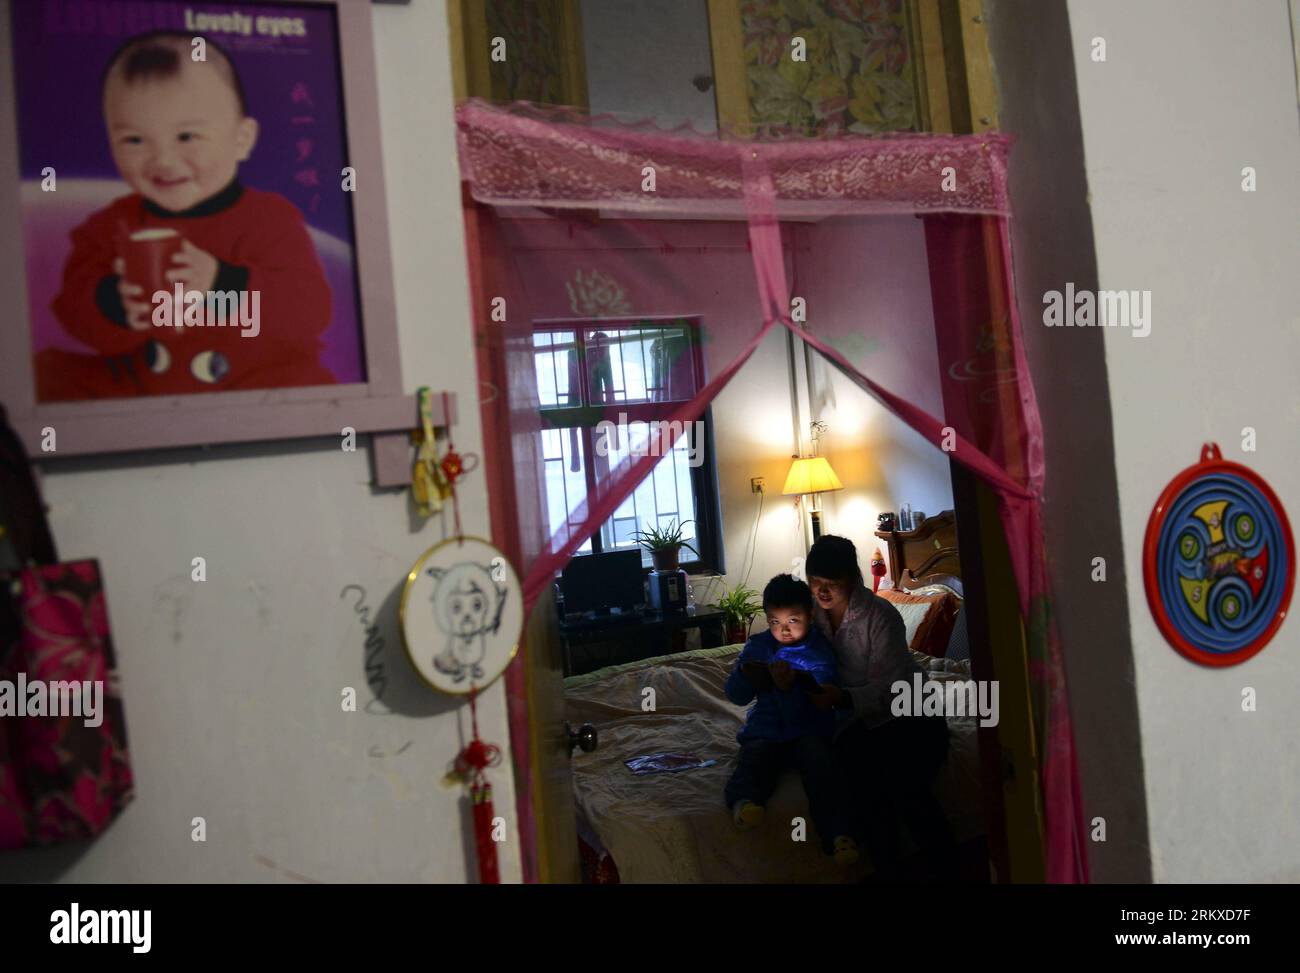 Bildnummer: 58948571  Datum: 19.12.2012  Copyright: imago/Xinhua Li Weizhen, a young boy suffering from leukemia, is seen at home with his mother in Xinyang City, central China s Henan Province, Dec. 19, 2012. Li was diagnosed with leukemia in 2011, and has spent nearly 300,000 yuan (48,120 U.S. dollars) for medical treatment. (Xinhua/Jin Liangkuai) (ry) CHINA-HENAN-LEUKEMIA-CHILDREN (CN) PUBLICATIONxNOTxINxCHN Gesellschaft krank Krankheit Leukämie Armut Kind x0x xrj 2012 quer     58948571 Date 19 12 2012 Copyright Imago XINHUA left  a Young Boy Suffering from Leukemia IS Lakes AT Home With Hi Stock Photo